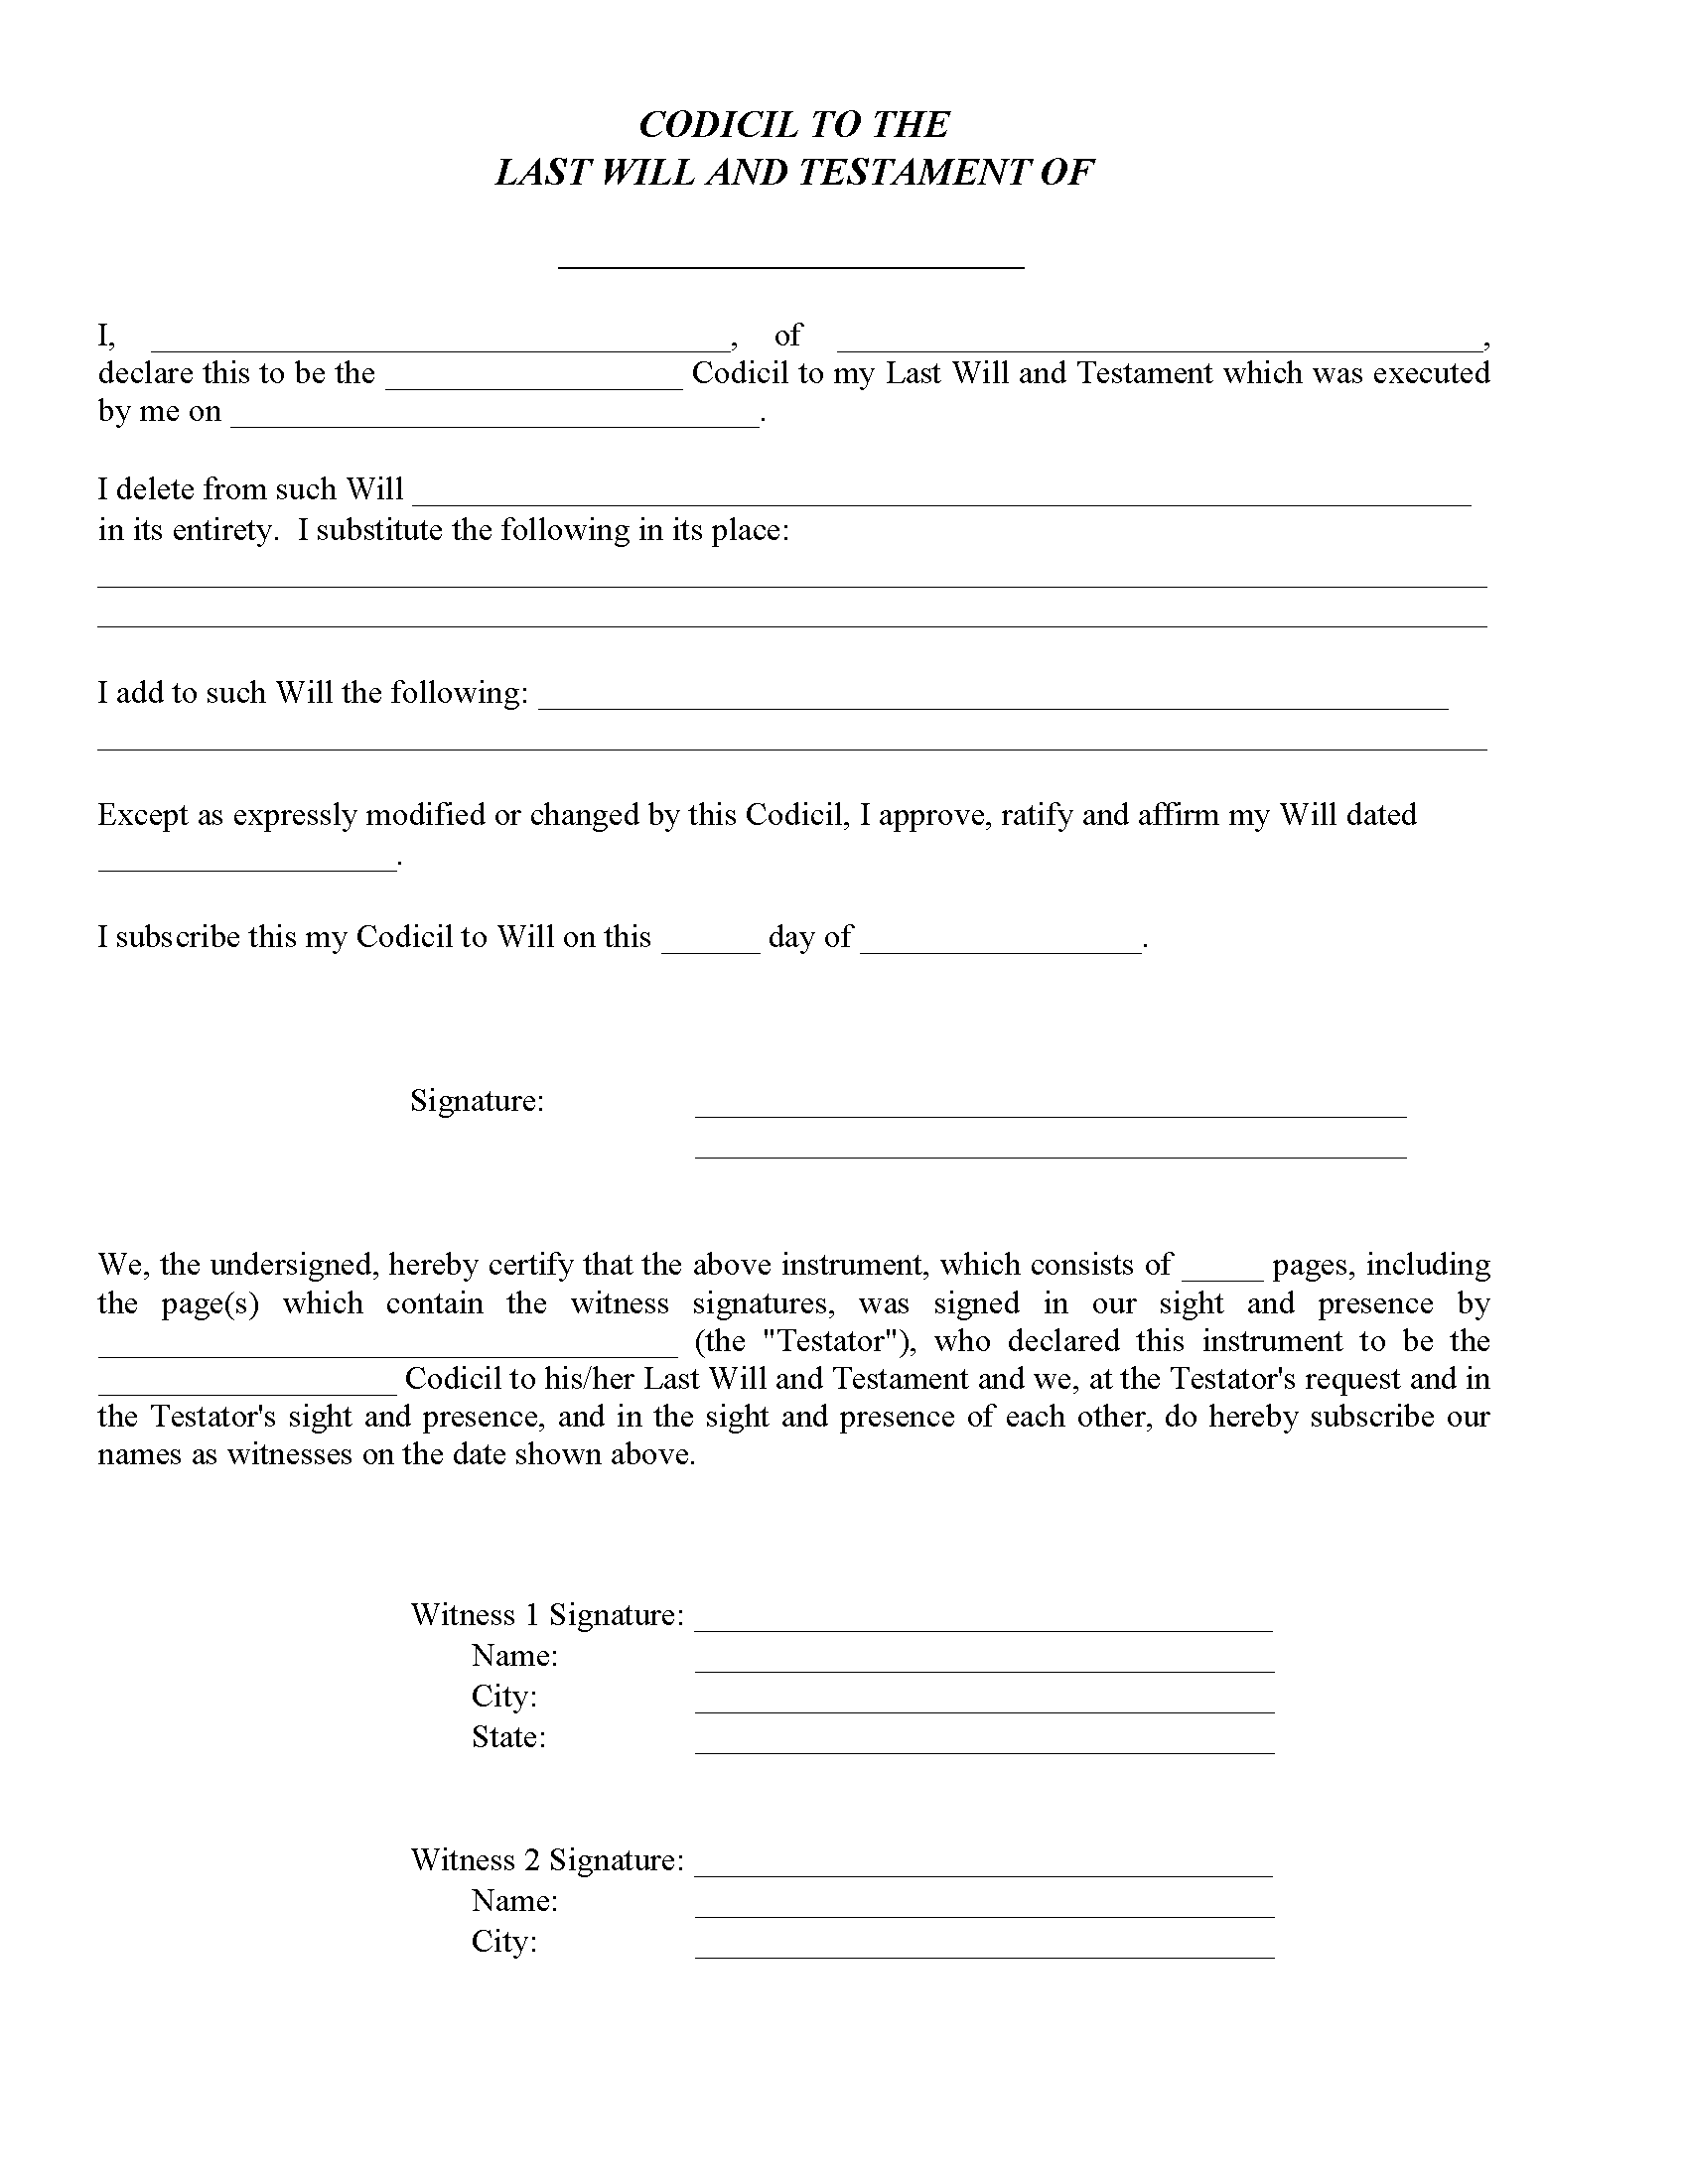 new-jersey-codicil-to-will-form-free-printable-legal-forms